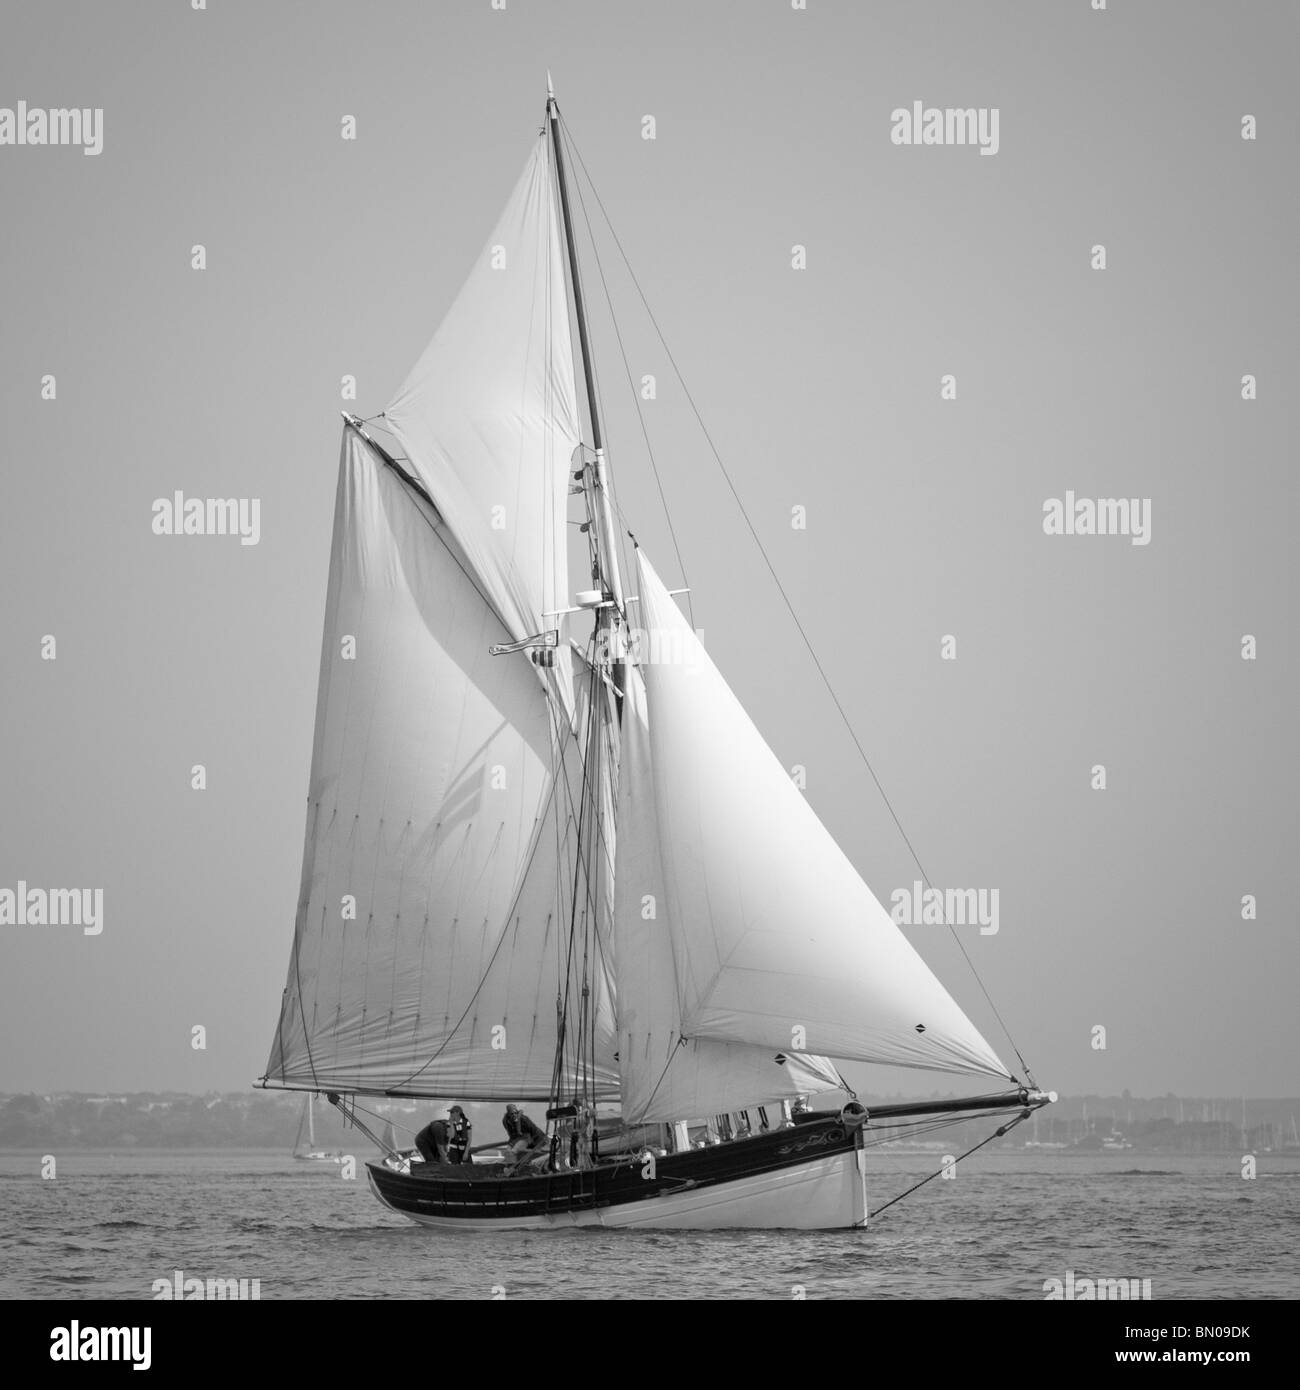 An old gaff rigged sailing boat in the Solent Stock Photo